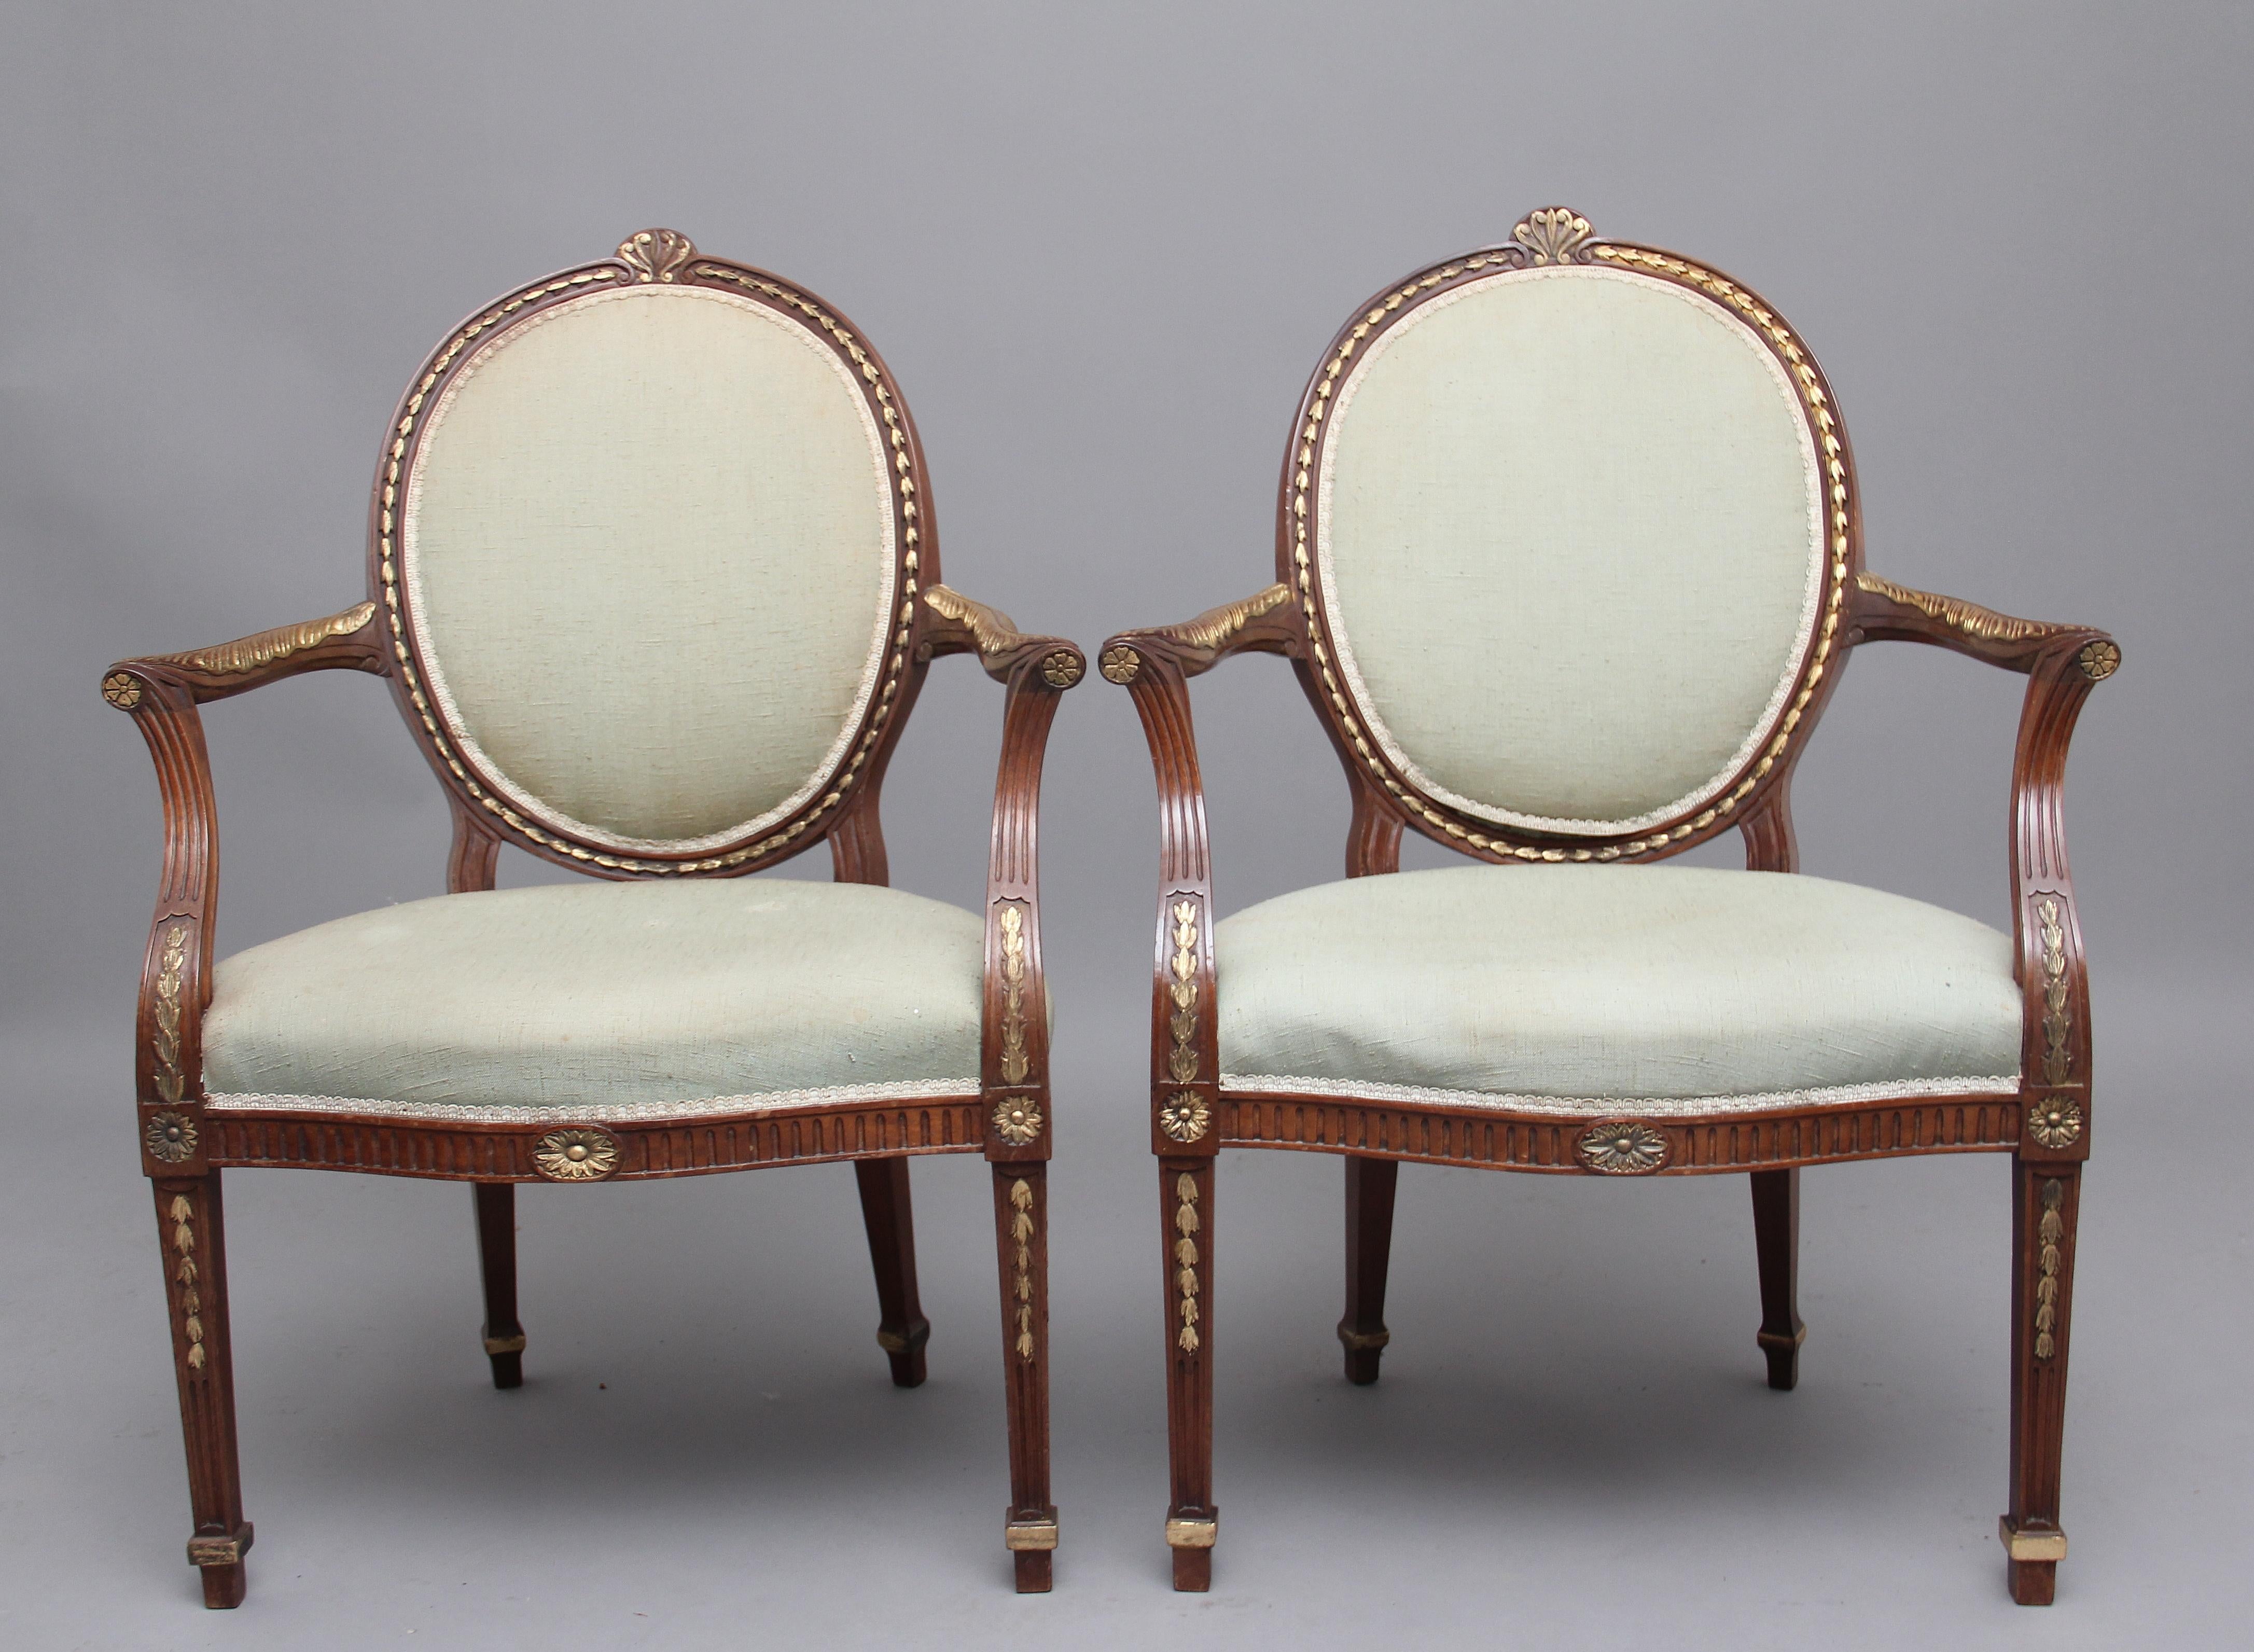 A decorative pair of early 20th century mahogany open armchairs in the Hepplewhite style, profusely decorated all over with gilding on carved wood, the oval padded backs and upholstered seat in a grey fabric, arms supported on out swept uprights,